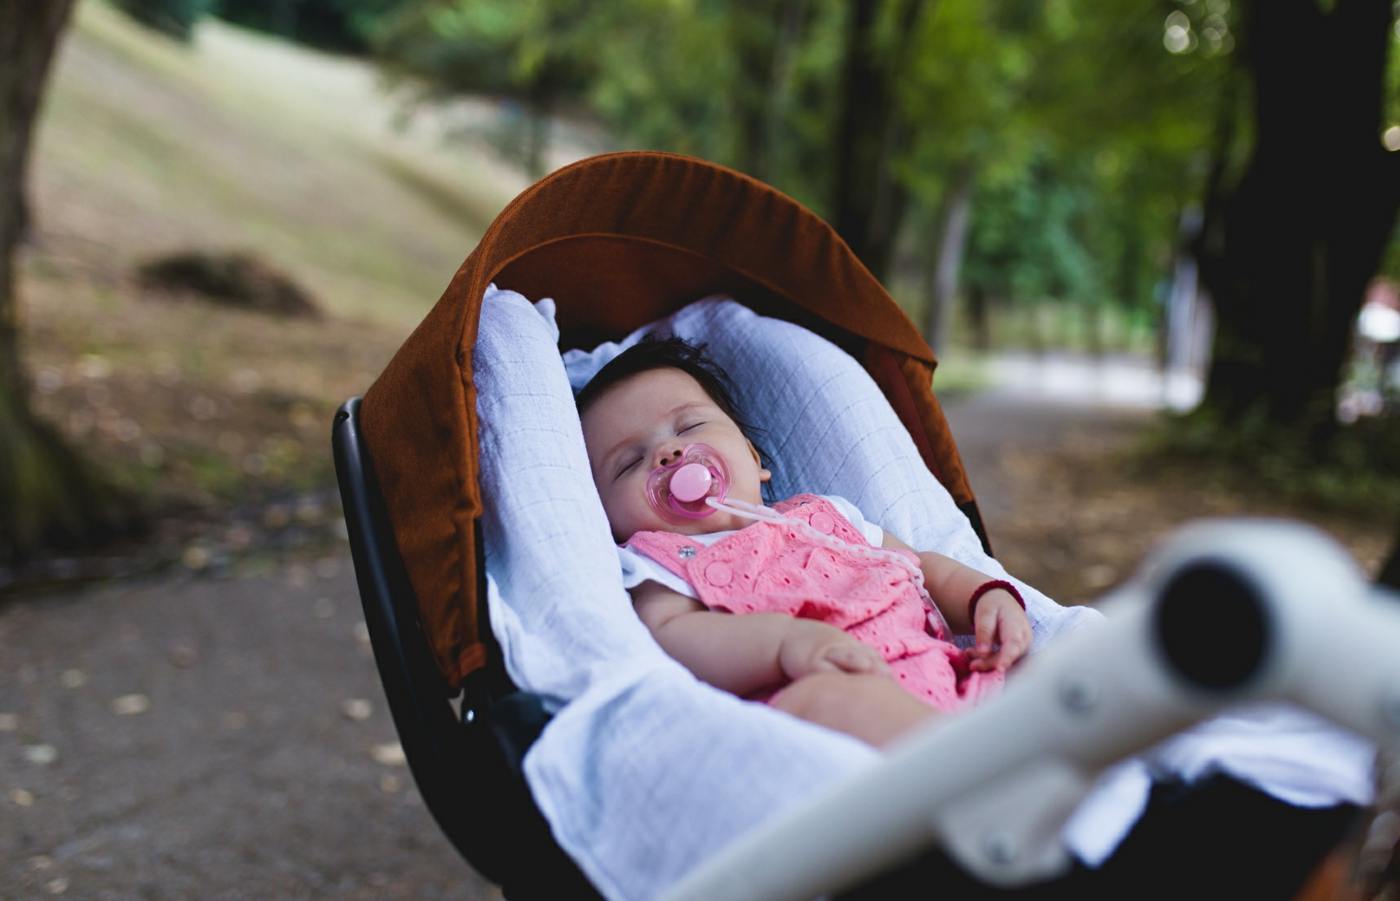 Comfortable and non-slip baby carriage should be told for comfort